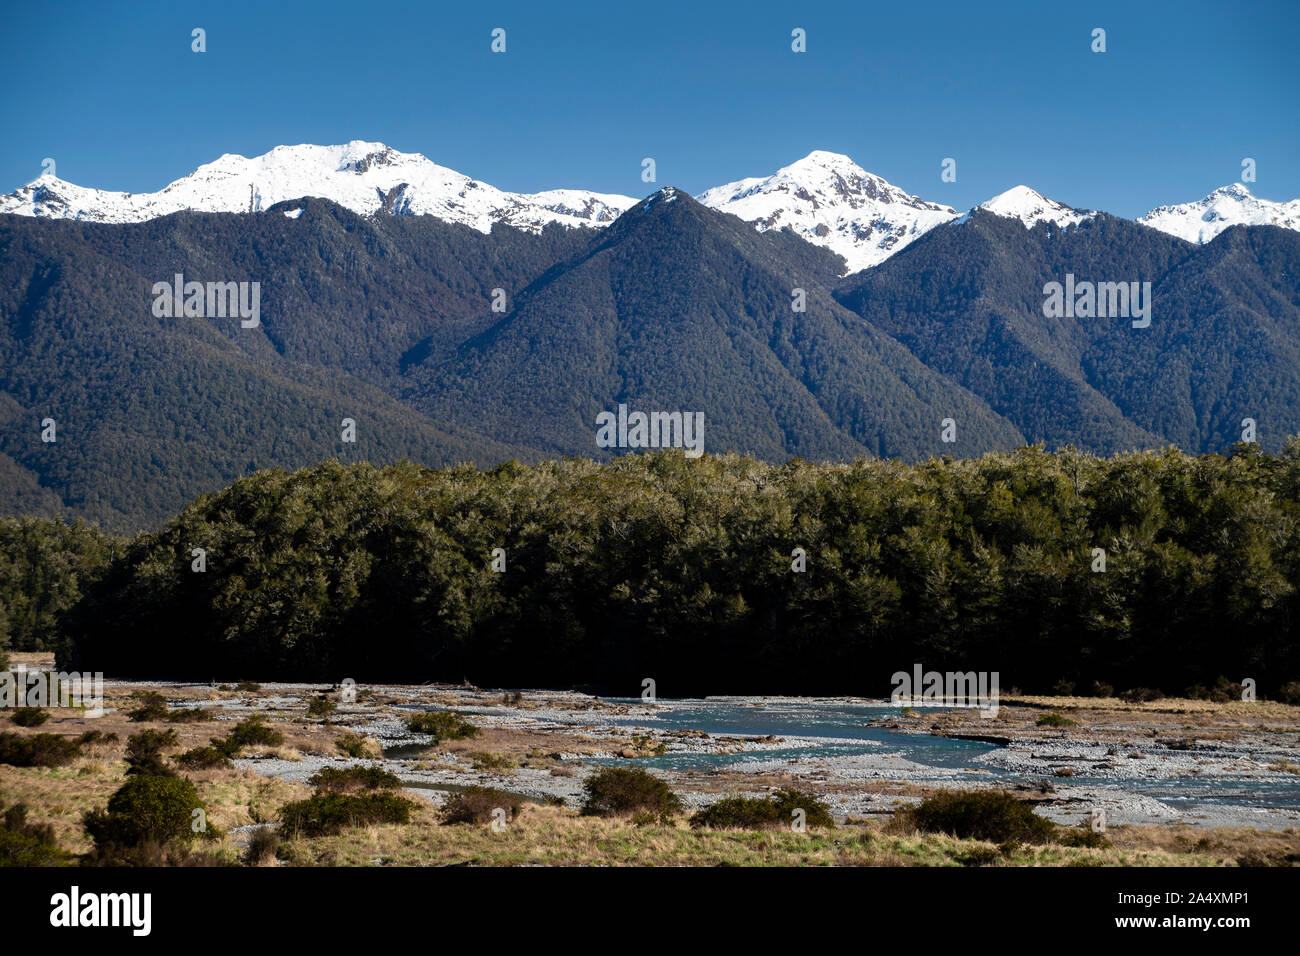 Mountains and native bush behind the winding Maruia River, near Lewis Pass, West Coast, New Zealand Stock Photo